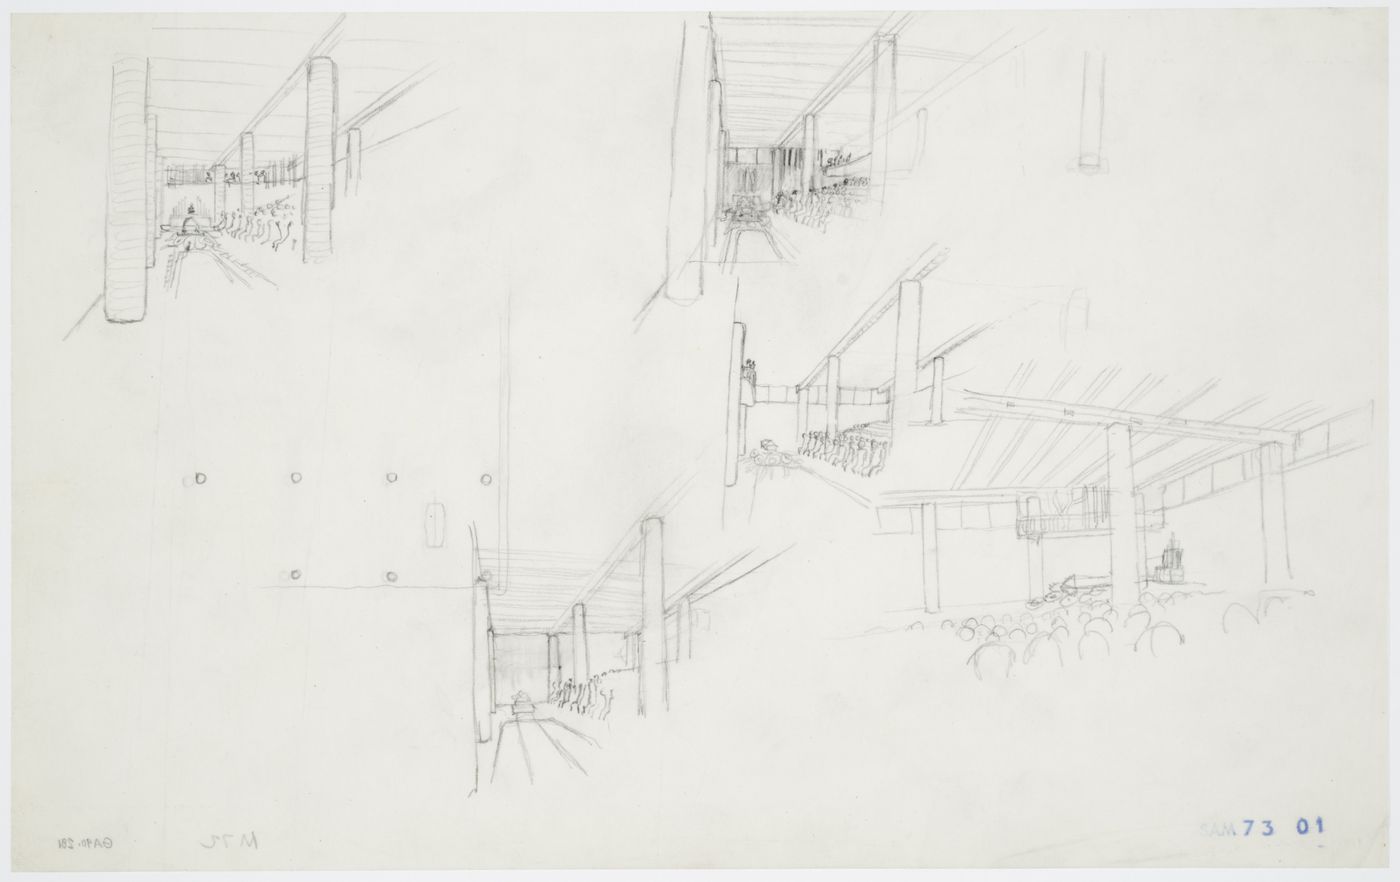 Interior sketch perspectives and sketch plan for the Chapel of the Holy Cross showing a service underway, Woodland Crematorium, Woodland Cemetery, Stockholm, Sweden